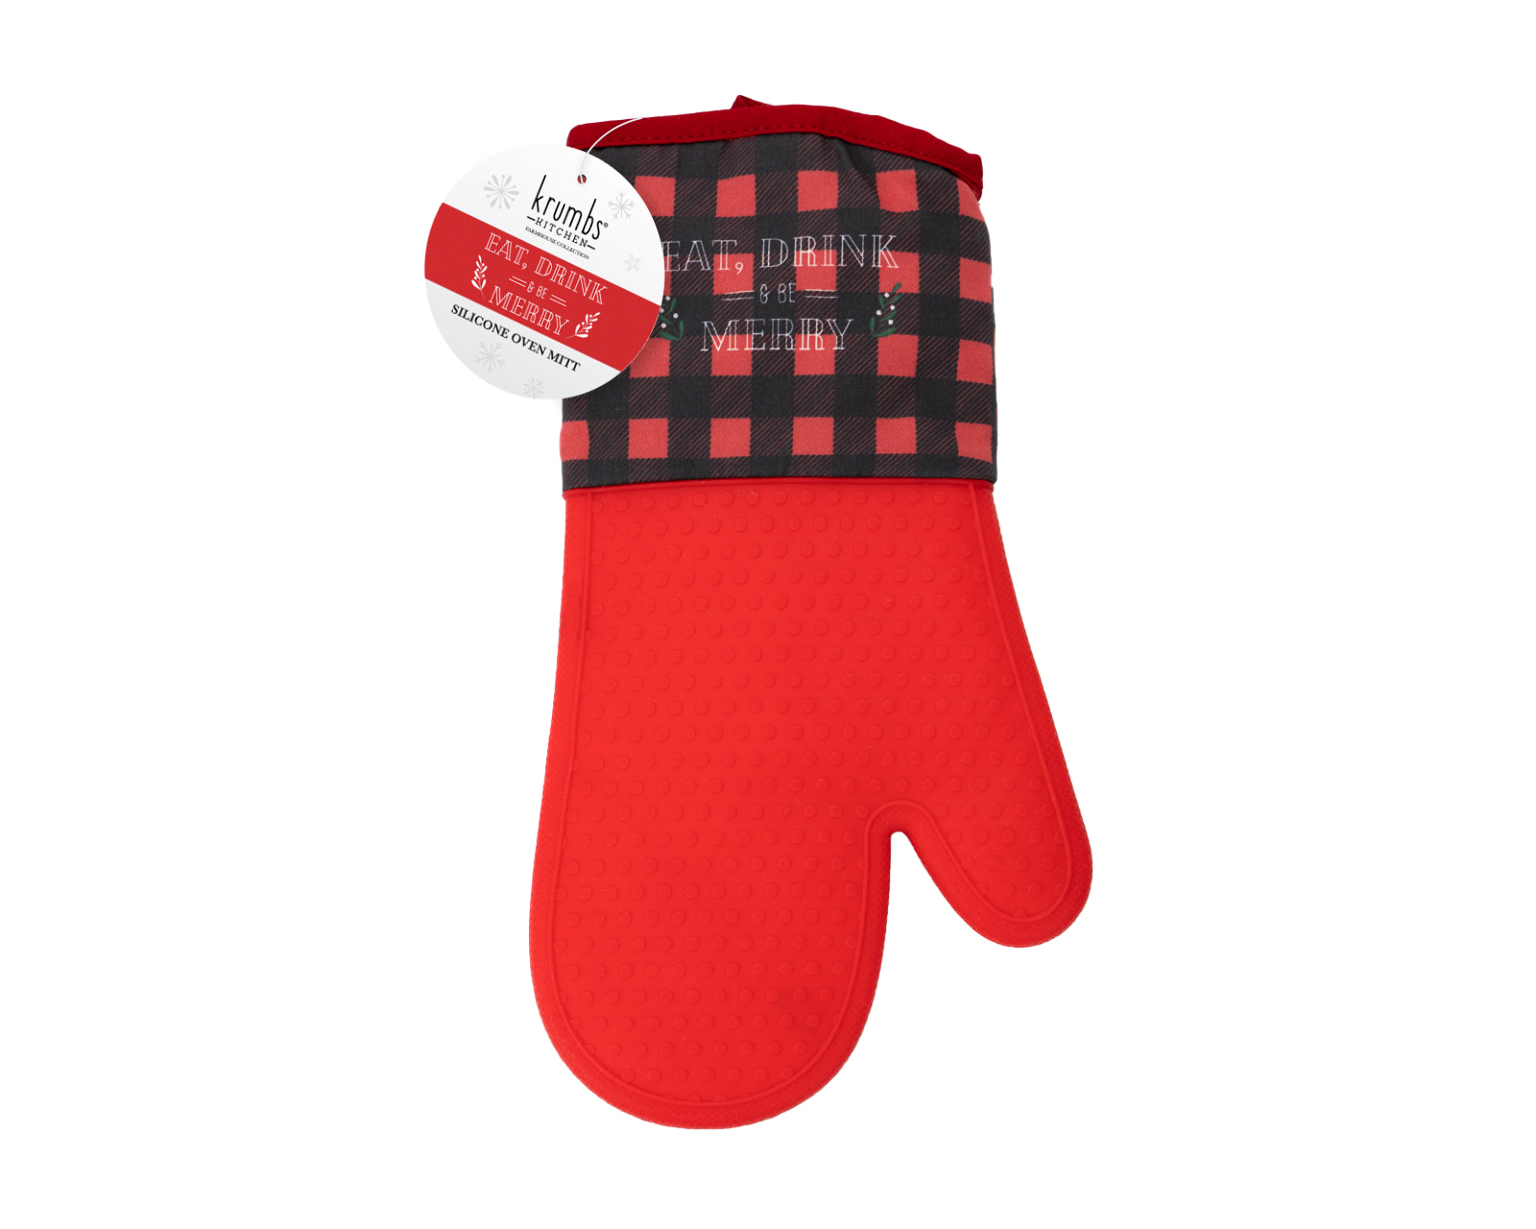 Ddi 2359532 Holiday Farmhouse Oven Mitts - Case of 12